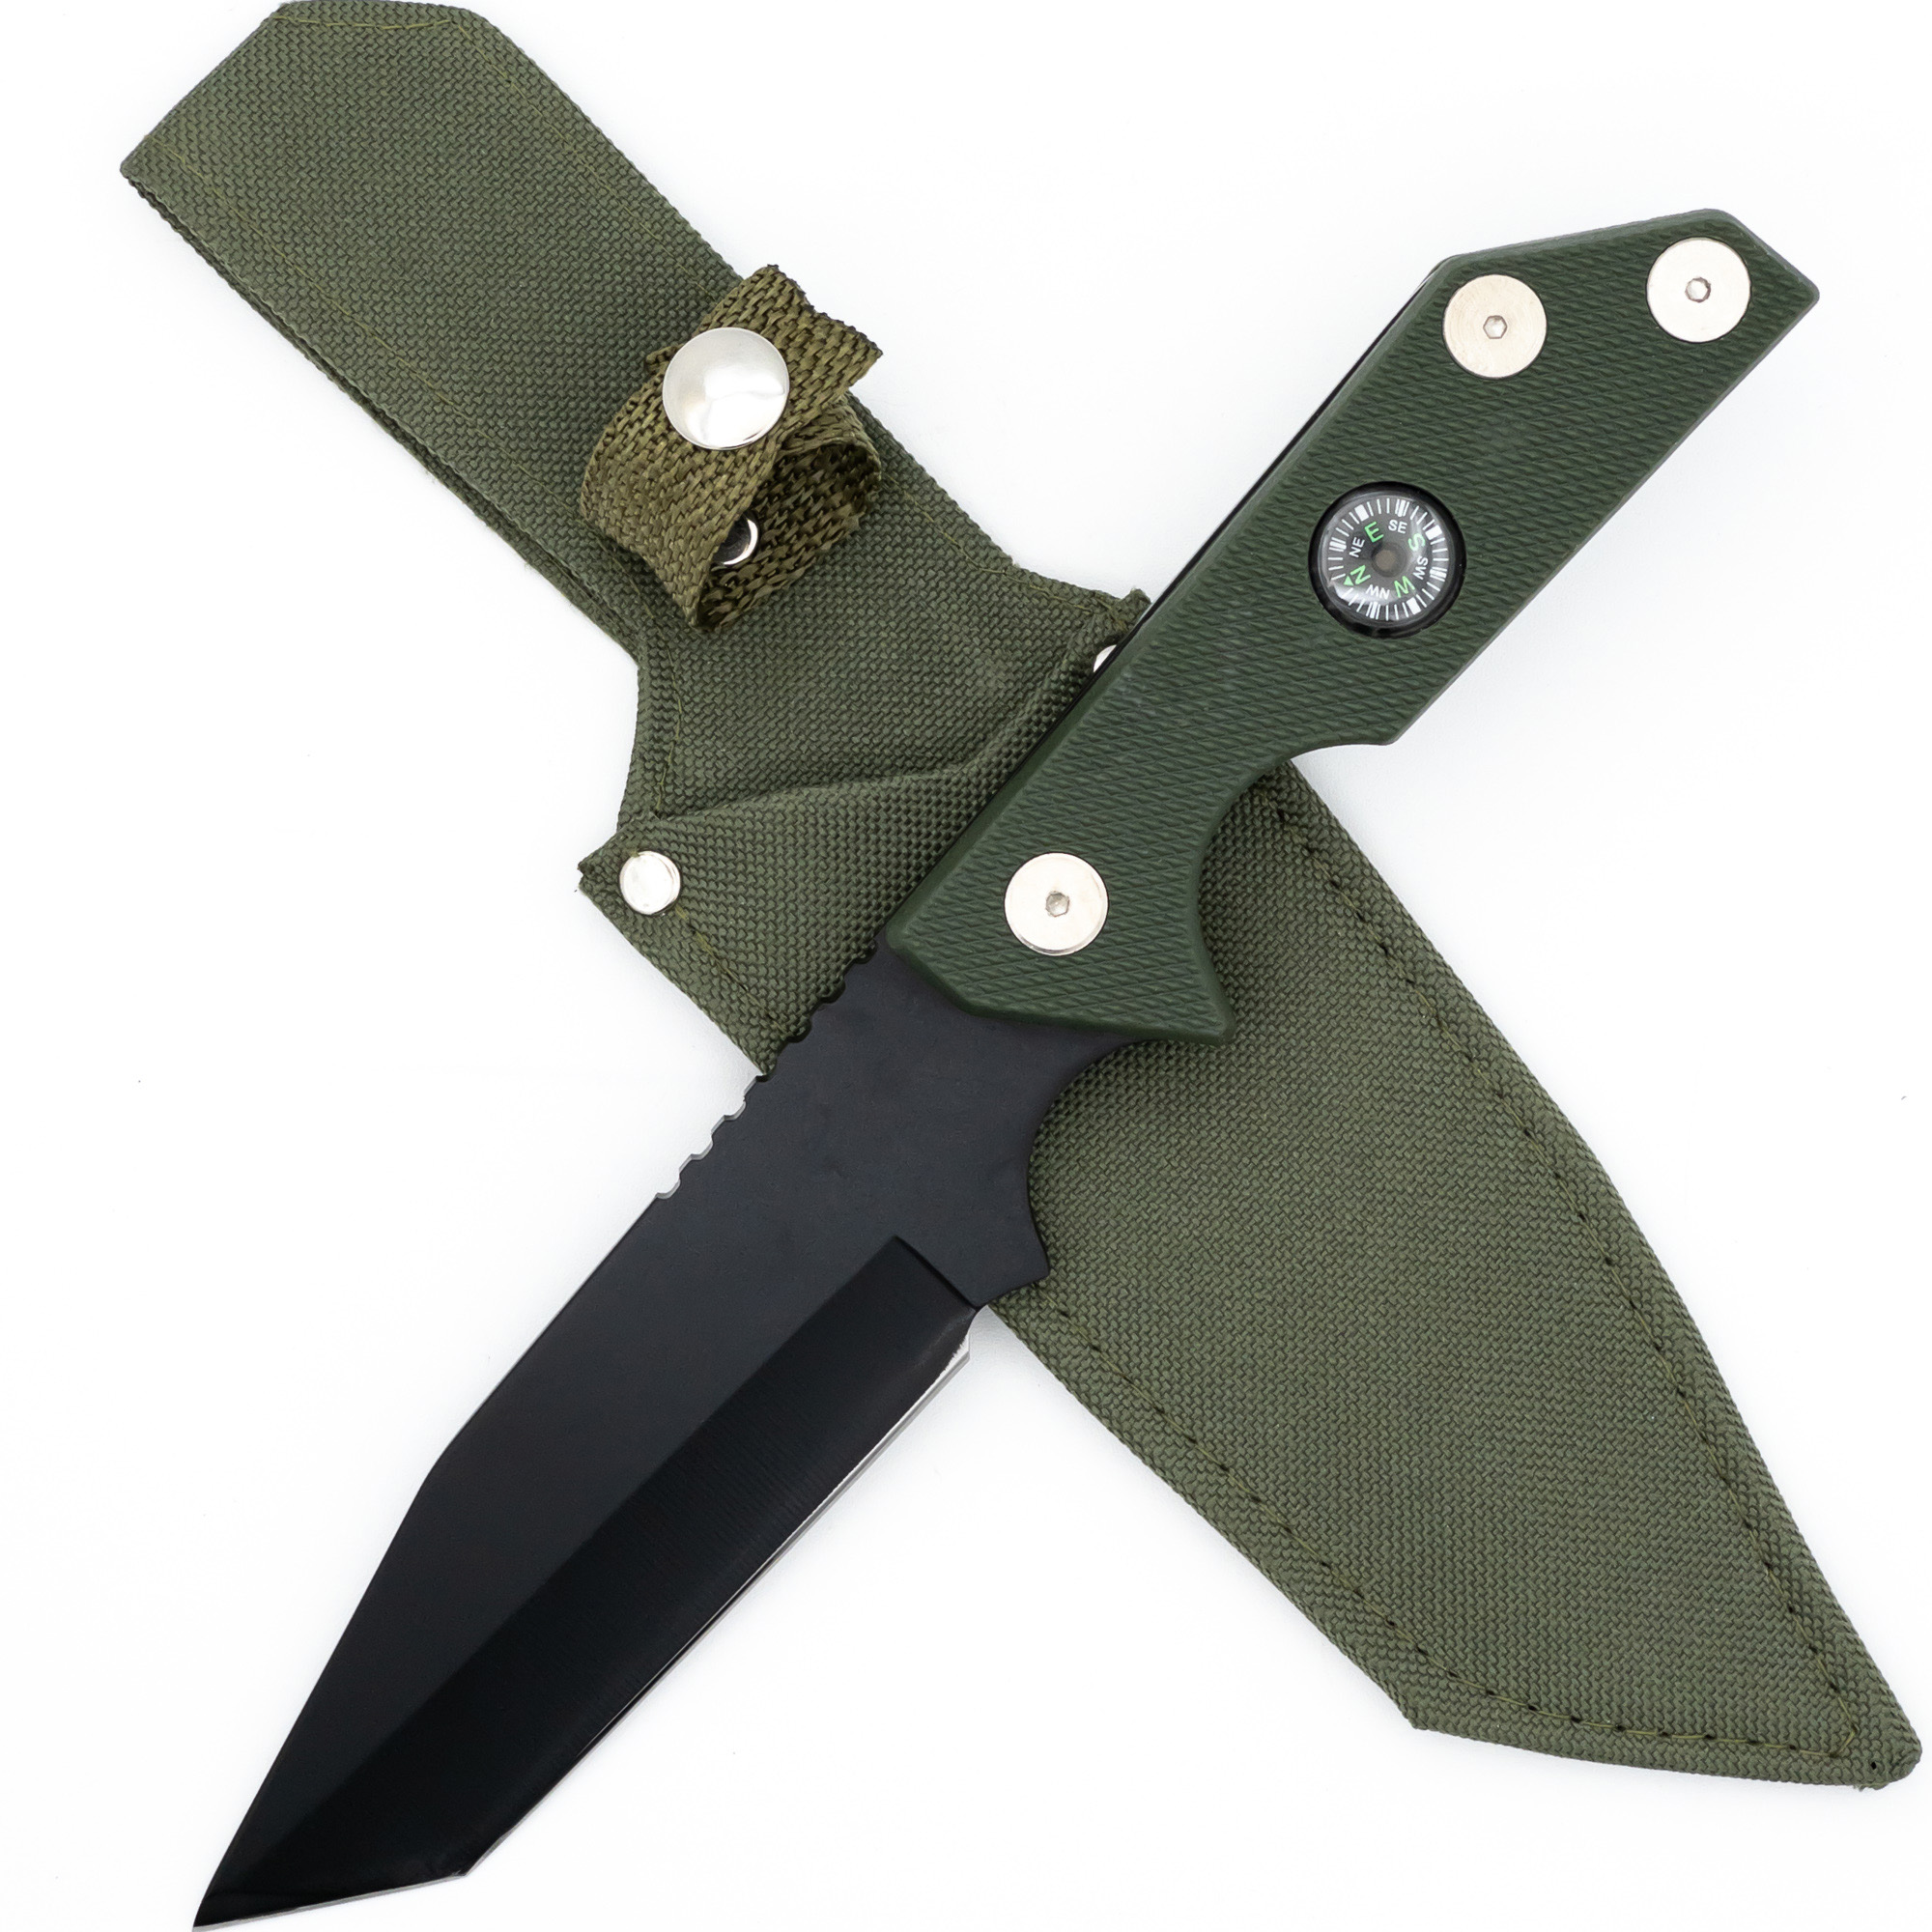 Heavily Wooded Tanto SURVIVAL Hunting KNIFE with Compass